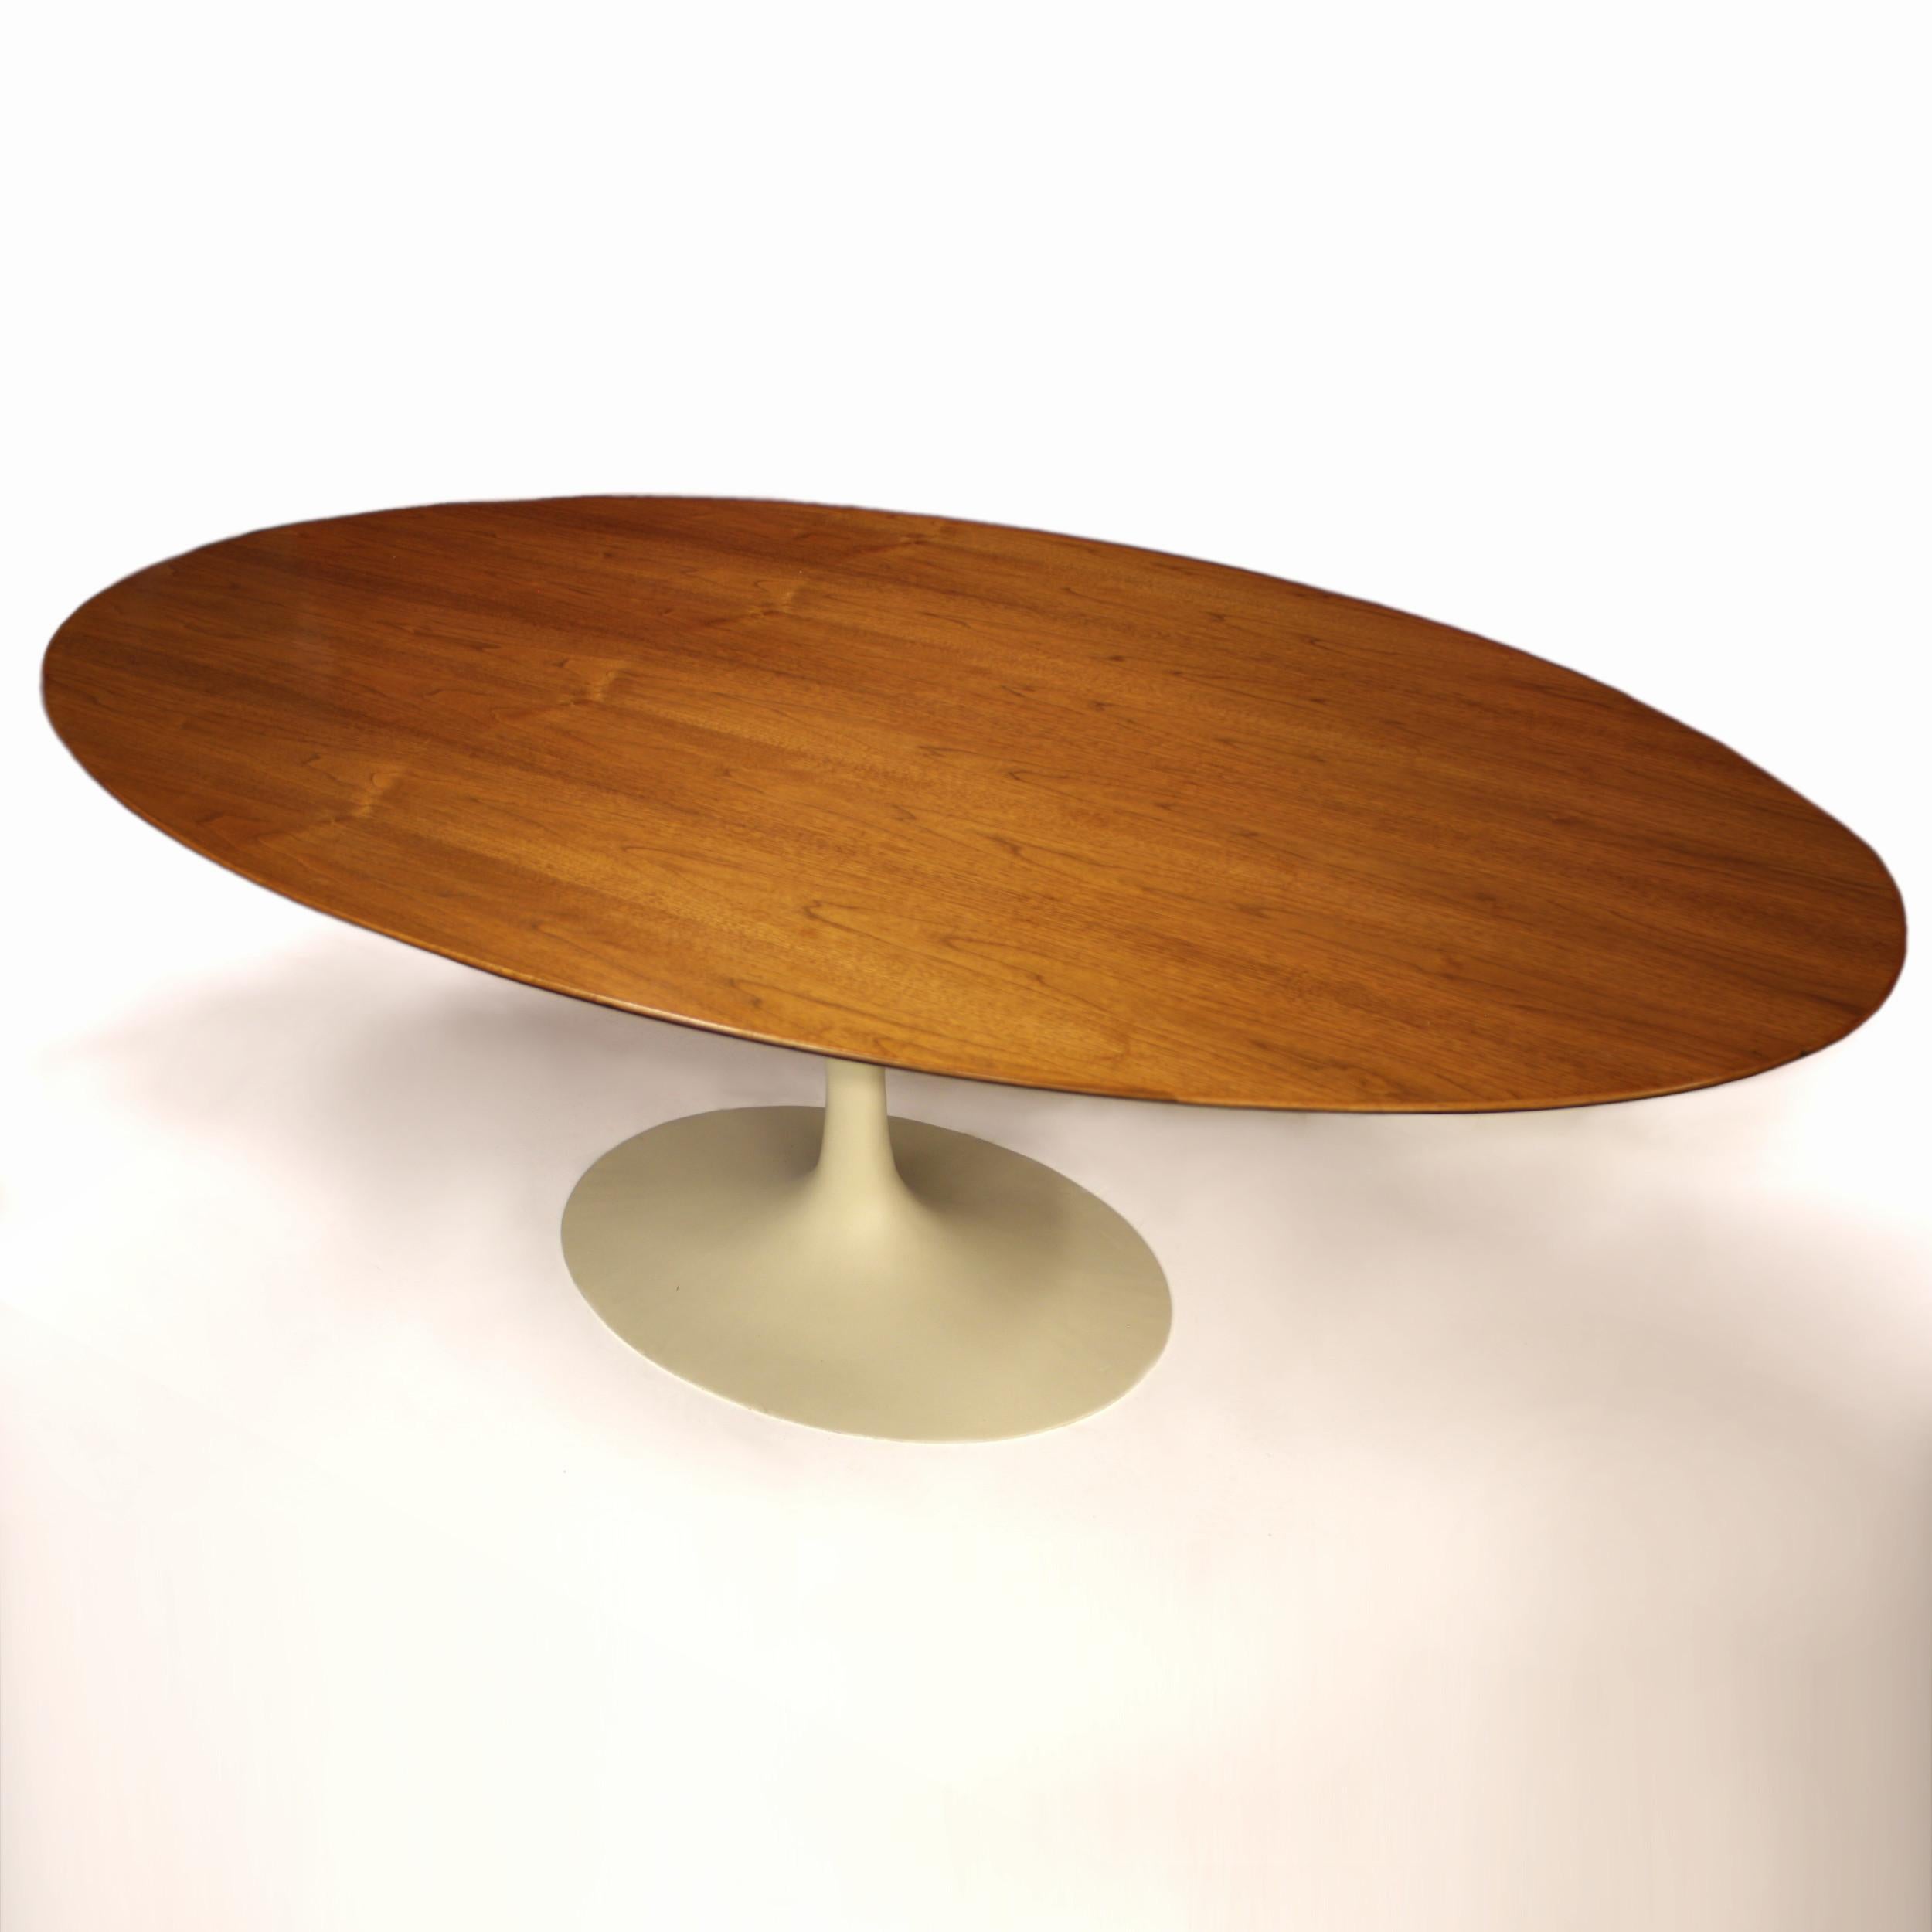 Original Tulip dining table designed by Eero Saarinen for Knoll. This is an exceptional original example of one of the true icons Mid-Century Modern design. The table even still has its original Knoll tag stamped with its January 5th 1970